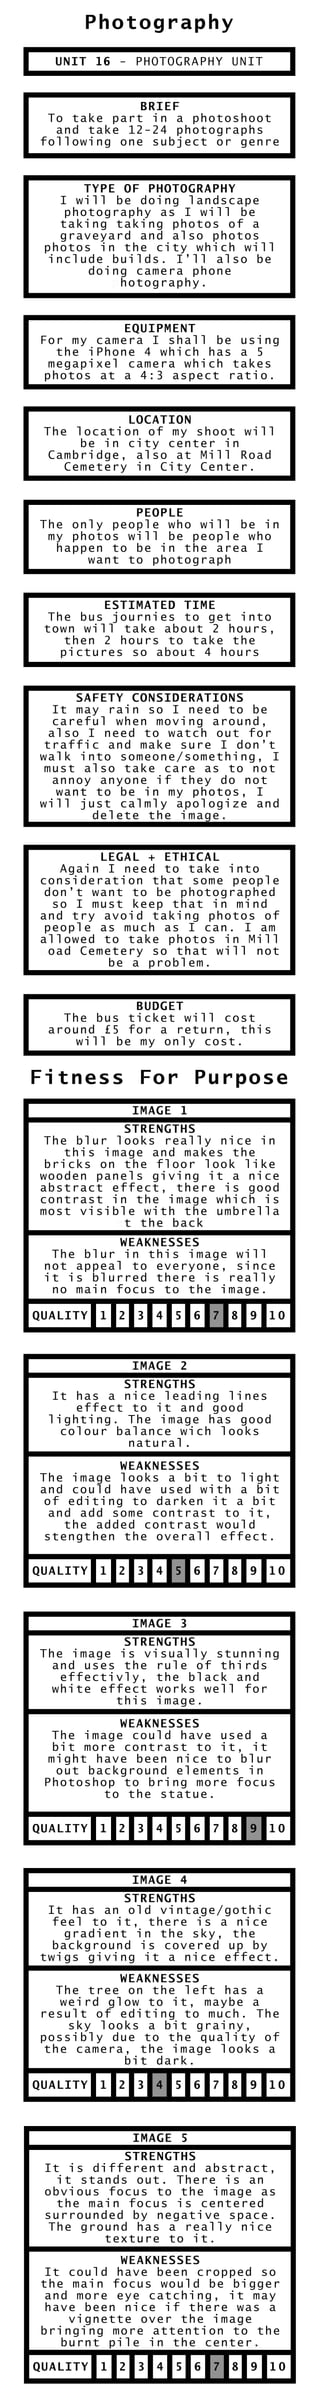 Photography
Fitness For Purpose
UNIT 16 - PHOTOGRAPHY UNIT
BRIEF
To take part in a photoshoot
and take 12-24 photographs
following one subject or genre
TYPE OF PHOTOGRAPHY
I will be doing landscapeI will be doing landscape
photography as I will be
taking taking photos of a
graveyard and also photos
photos in the city which will
include builds. I’ll also be
doing camera phone
photography.photography.
EQUIPMENT
For my camera I shall be using
the iPhone 4 which has a 5
megapixel camera which takes
photos at a 4:3 aspect ratio.
LOCATION
The location of my shoot will
be in city center in
Cambridge, also at Mill Road
Cemetery in City Center.
PEOPLE
The only people who will be in
my photos will be people who
happen to be in the area I
want to photograph
ESTIMATED TIME
The bus journies to get into
town will take about 2 hours,
then 2 hours to take the
pictures so about 4 hours
SAFETY CONSIDERATIONS
It may rain so I need to beIt may rain so I need to be
careful when moving around,
also I need to watch out for
traffic and make sure I don’t
walk into someone/something, I
must also take care as to not
annoy anyone if they do not
want to be in my photos, Iwant to be in my photos, I
will just calmly apologize and
delete the image.
LEGAL + ETHICAL
Again I need to take intoAgain I need to take into
consideration that some people
don’t want to be photographed
so I must keep that in mind
and try avoid taking photos of
people as much as I can. I am
allowed to take photos in Mill
Road Cemetery so that will notRoad Cemetery so that will not
be a problem.
BUDGET
The bus ticket will cost
around £5 for a return, this
will be my only cost.
QUALITY 1 2 3 4 5 6 7 8 9 10
IMAGE 1
STRENGTHS
The blur looks really nice inThe blur looks really nice in
this image and makes the
bricks on the floor look like
wooden panels giving it a nice
abstract effect, there is good
contrast in the image which is
most visible with the umbrella
at the backat the back
WEAKNESSES
The blur in this image will
not appeal to everyone, since
it is blurred there is really
no main focus to the image.
QUALITY 1 2 3 4 5 6 7 8 9 10
IMAGE 2
STRENGTHS
It has a nice leading lines
effect to it and good
lighting. The image has good
colour balance wich looks
natural.
WEAKNESSES
The image looks a bit to lightThe image looks a bit to light
and could have used with a bit
of editing to darken it a bit
and add some contrast to it,
the added contrast would
stengthen the overall effect.
QUALITY 1 2 3 4 5 6 7 8 9 10
IMAGE 3
STRENGTHS
The image is visually stunning
and uses the rule of thirds
effectivly, the black and
white effect works well for
this image.
WEAKNESSES
The image could have used aThe image could have used a
bit more contrast to it, it
might have been nice to blur
out background elements in
Photoshop to bring more focus
to the statue.
QUALITY 1 2 3 4 5 6 7 8 9 10
IMAGE 4
STRENGTHS
It has an old vintage/gothic
feel to it, there is a nice
gradient in the sky, the
background is covered up by
twigs giving it a nice effect.
WEAKNESSES
The tree on the left has aThe tree on the left has a
weird glow to it, maybe a
result of editing to much. The
sky looks a bit grainy,
possibly due to the quality of
the camera, the image looks a
bit dark.
QUALITY 1 2 3 4 5 6 7 8 9 10
IMAGE 5
STRENGTHS
It is different and abstract,It is different and abstract,
it stands out. There is an
obvious focus to the image as
the main focus is centered
surrounded by negative space.
The ground has a really nice
texture to it.
WEAKNESSES
It could have been cropped soIt could have been cropped so
the main focus would be bigger
and more eye catching, it may
have been nice if there was a
vignette over the image
bringing more attention to the
burnt pile in the center.
 